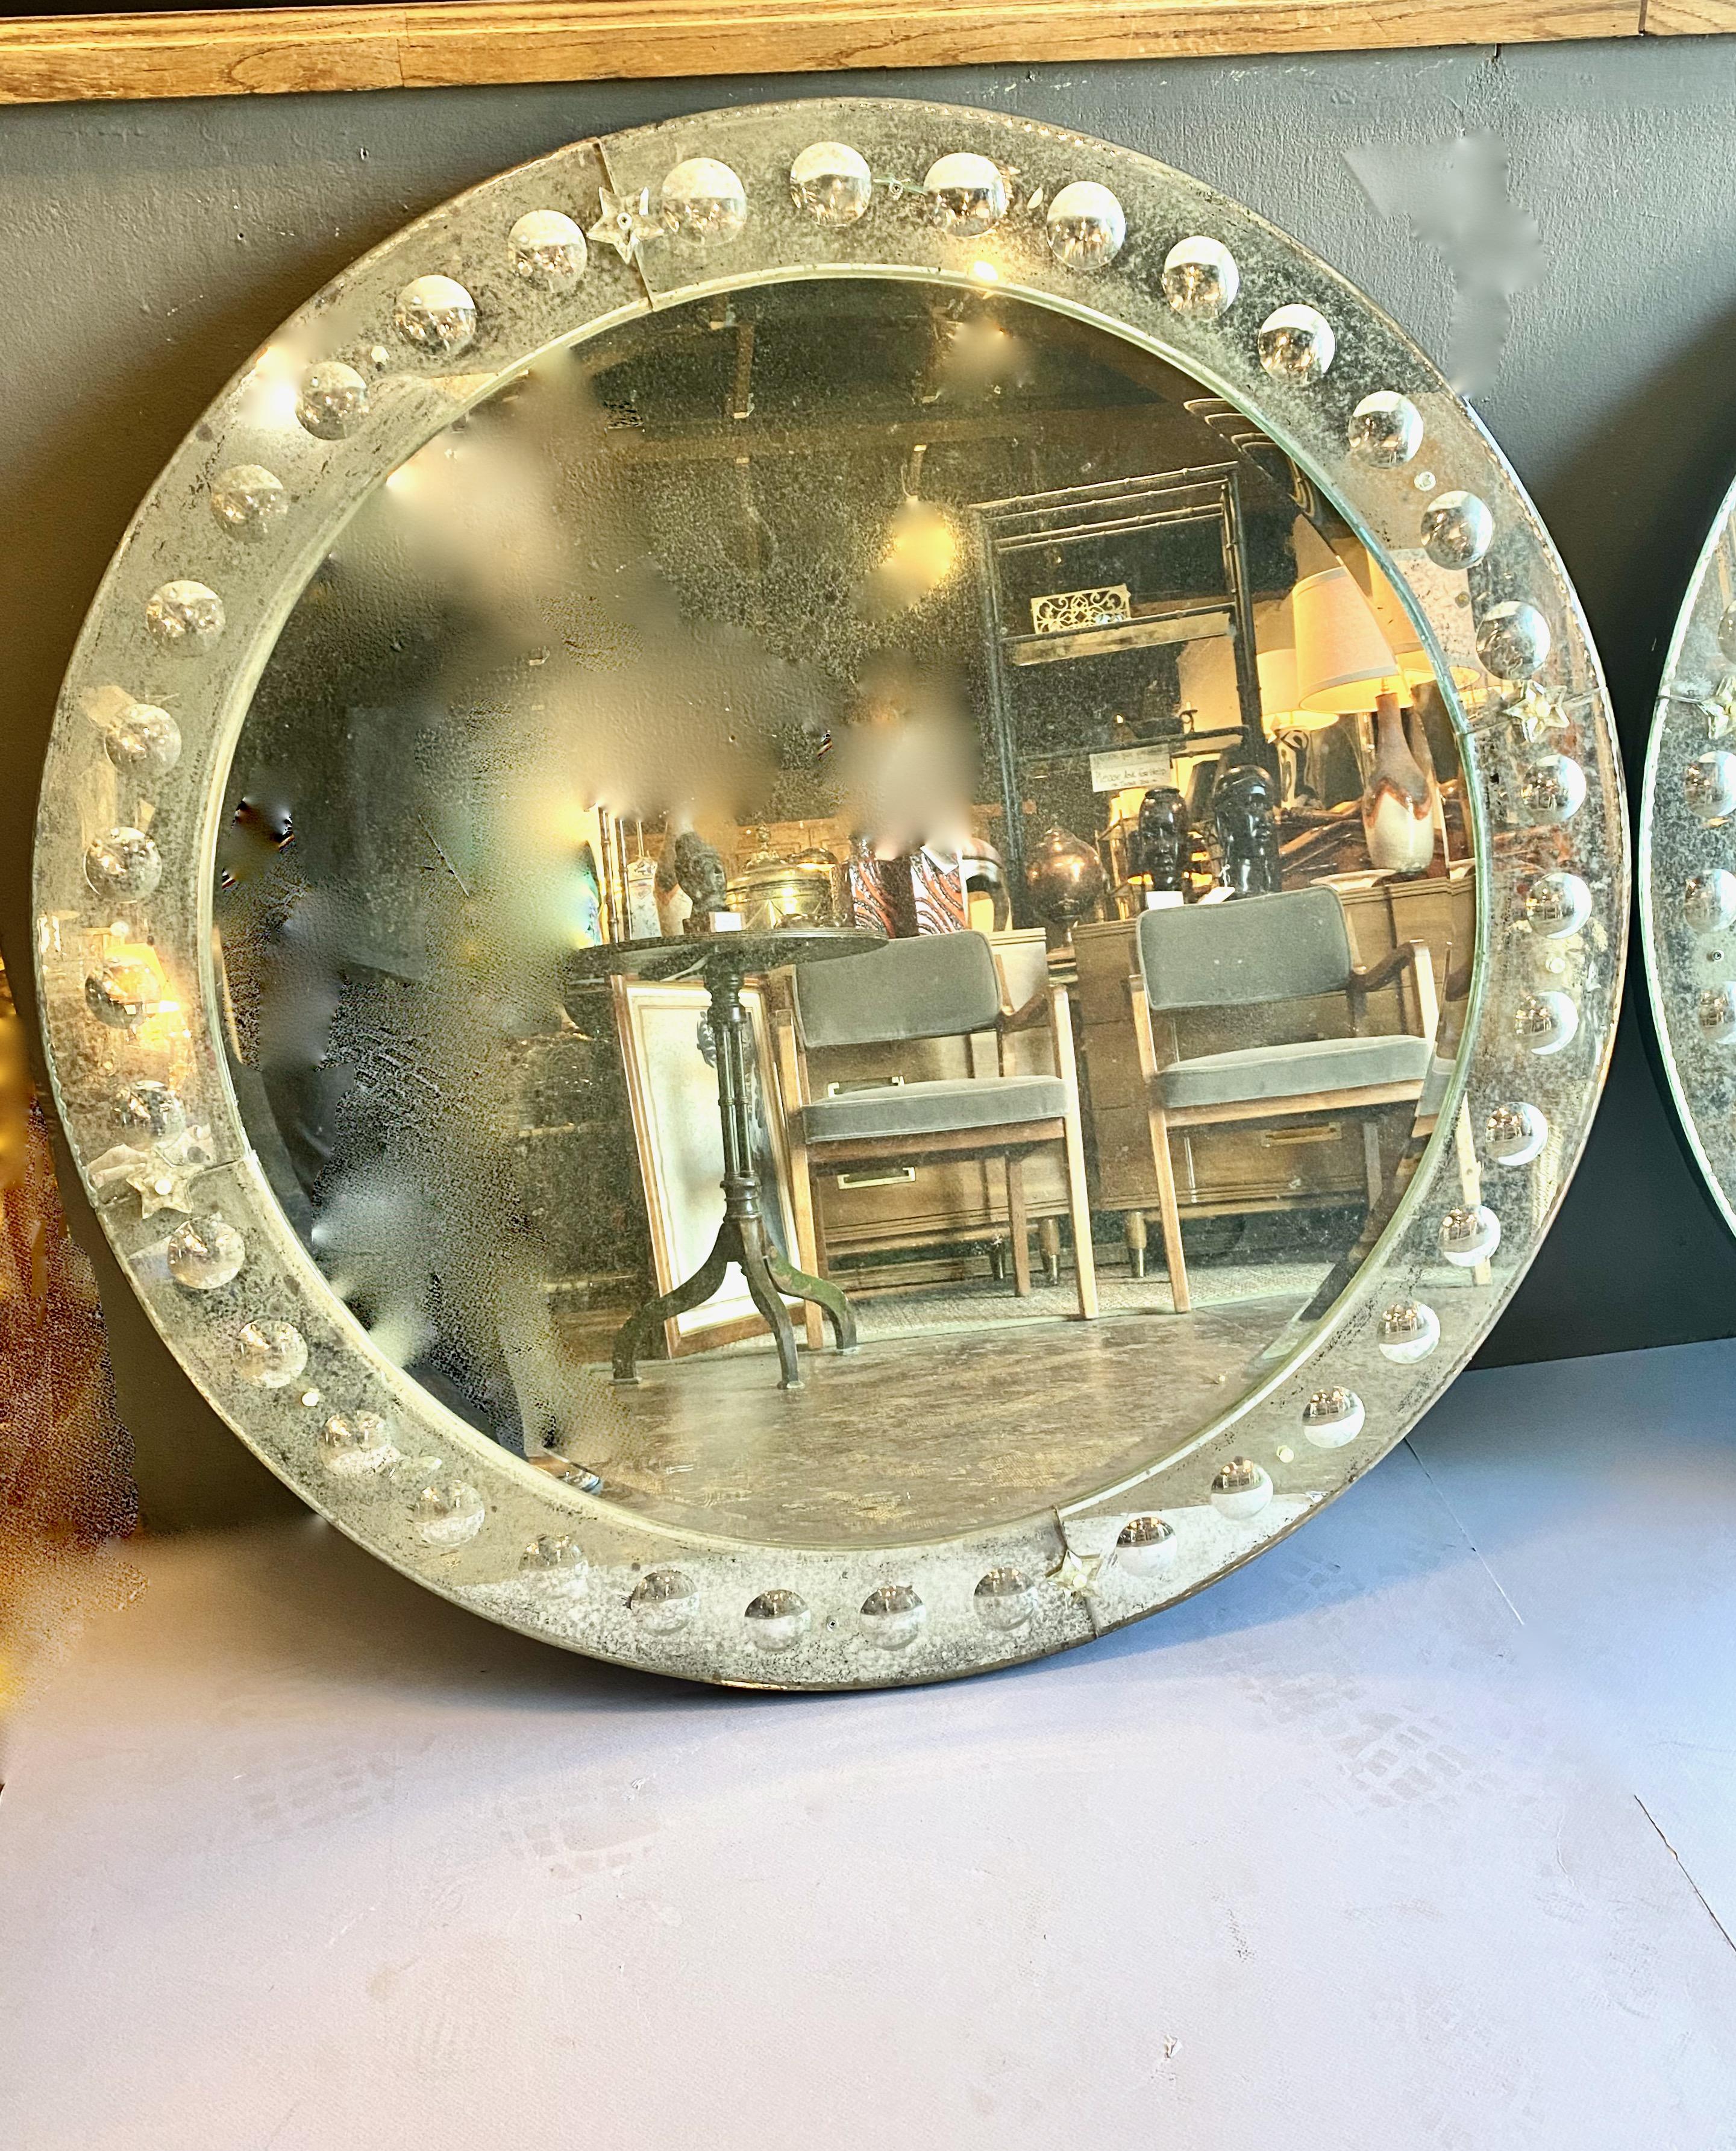 This is a spectacular pair of mid-20th century 40 inch diameter mercury glass mirrors. The central round section is surround by a deep beveled glass frame detailed with large hollowed out rondelles. The mercury glass has acquired a rich hazing which